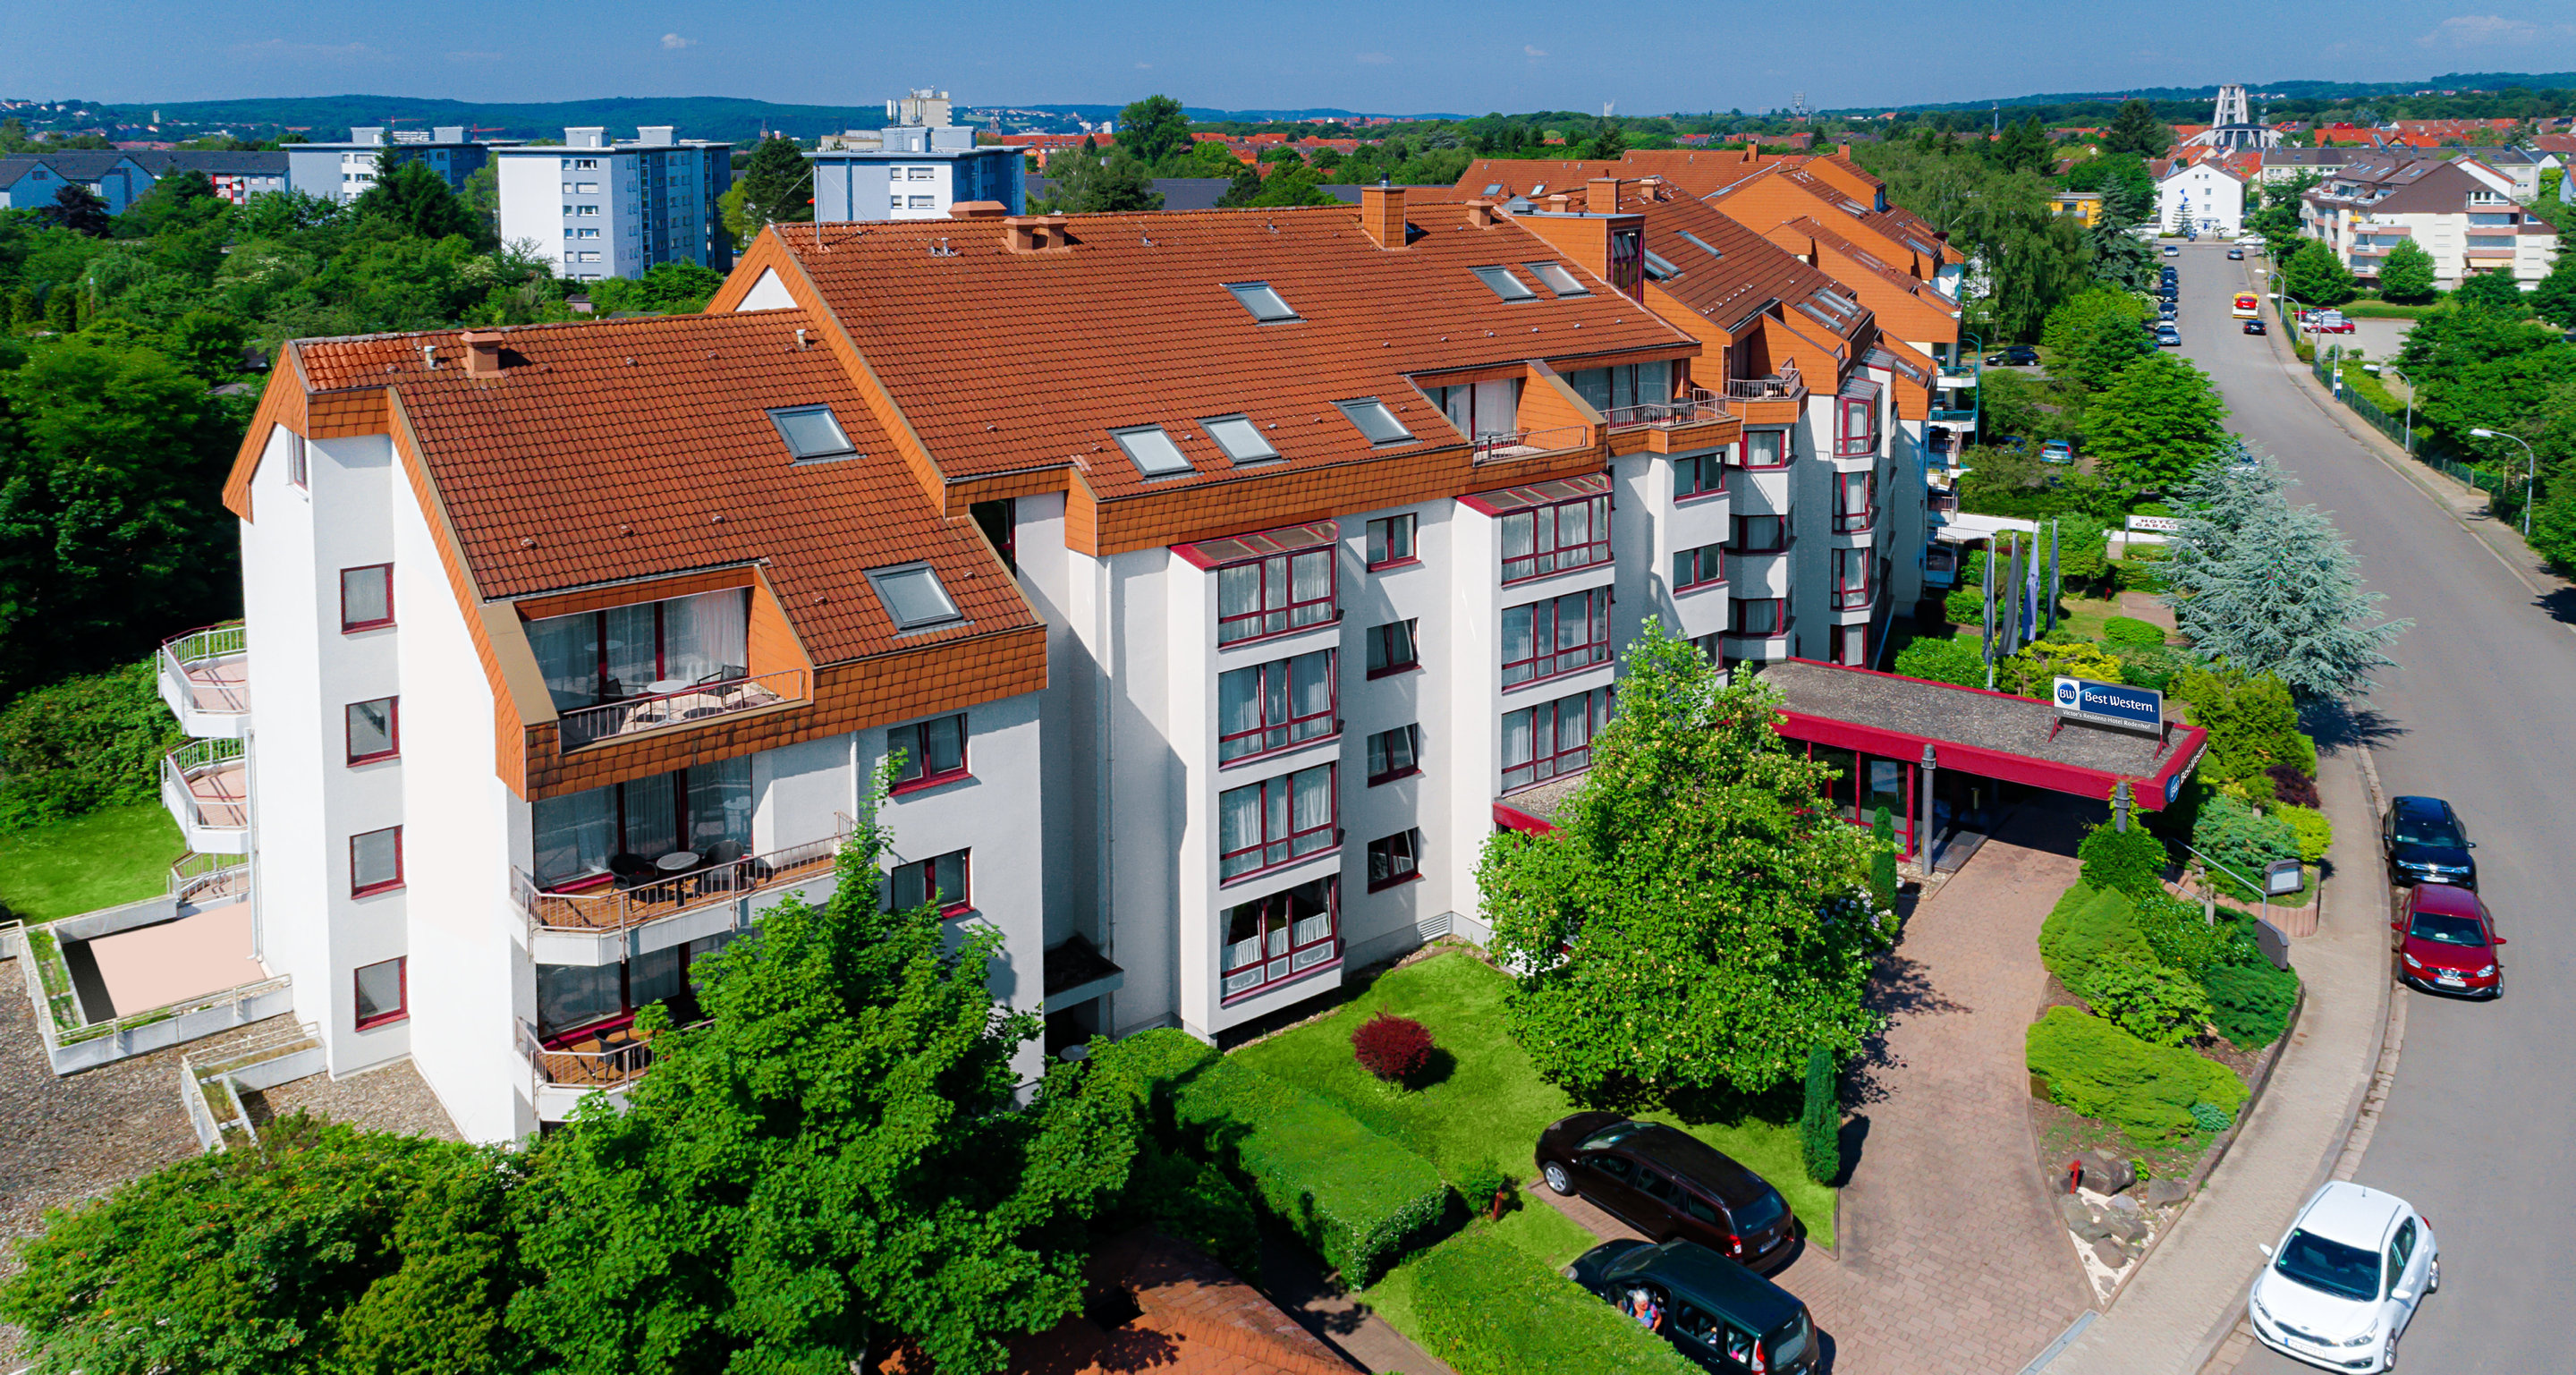 Best Western Victor's Residenz-Hotel Rodenhof <br/>73.33 ew <br/> <a href='http://vakantieoplossing.nl/outpage/?id=abb3ca716585e770f775ac7880dc8e34' target='_blank'>View Details</a>